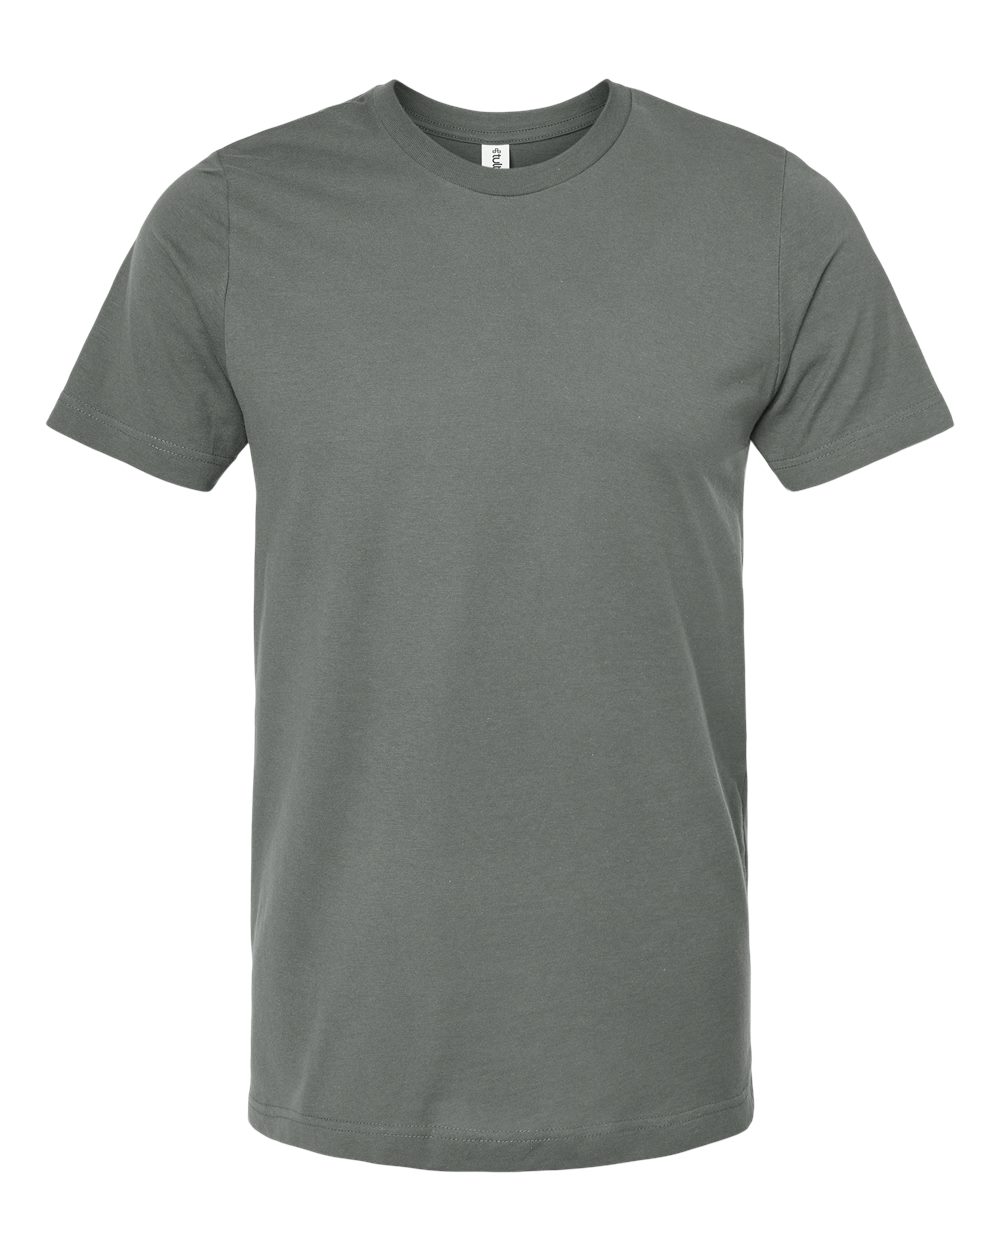 click to view Charcoal Grey